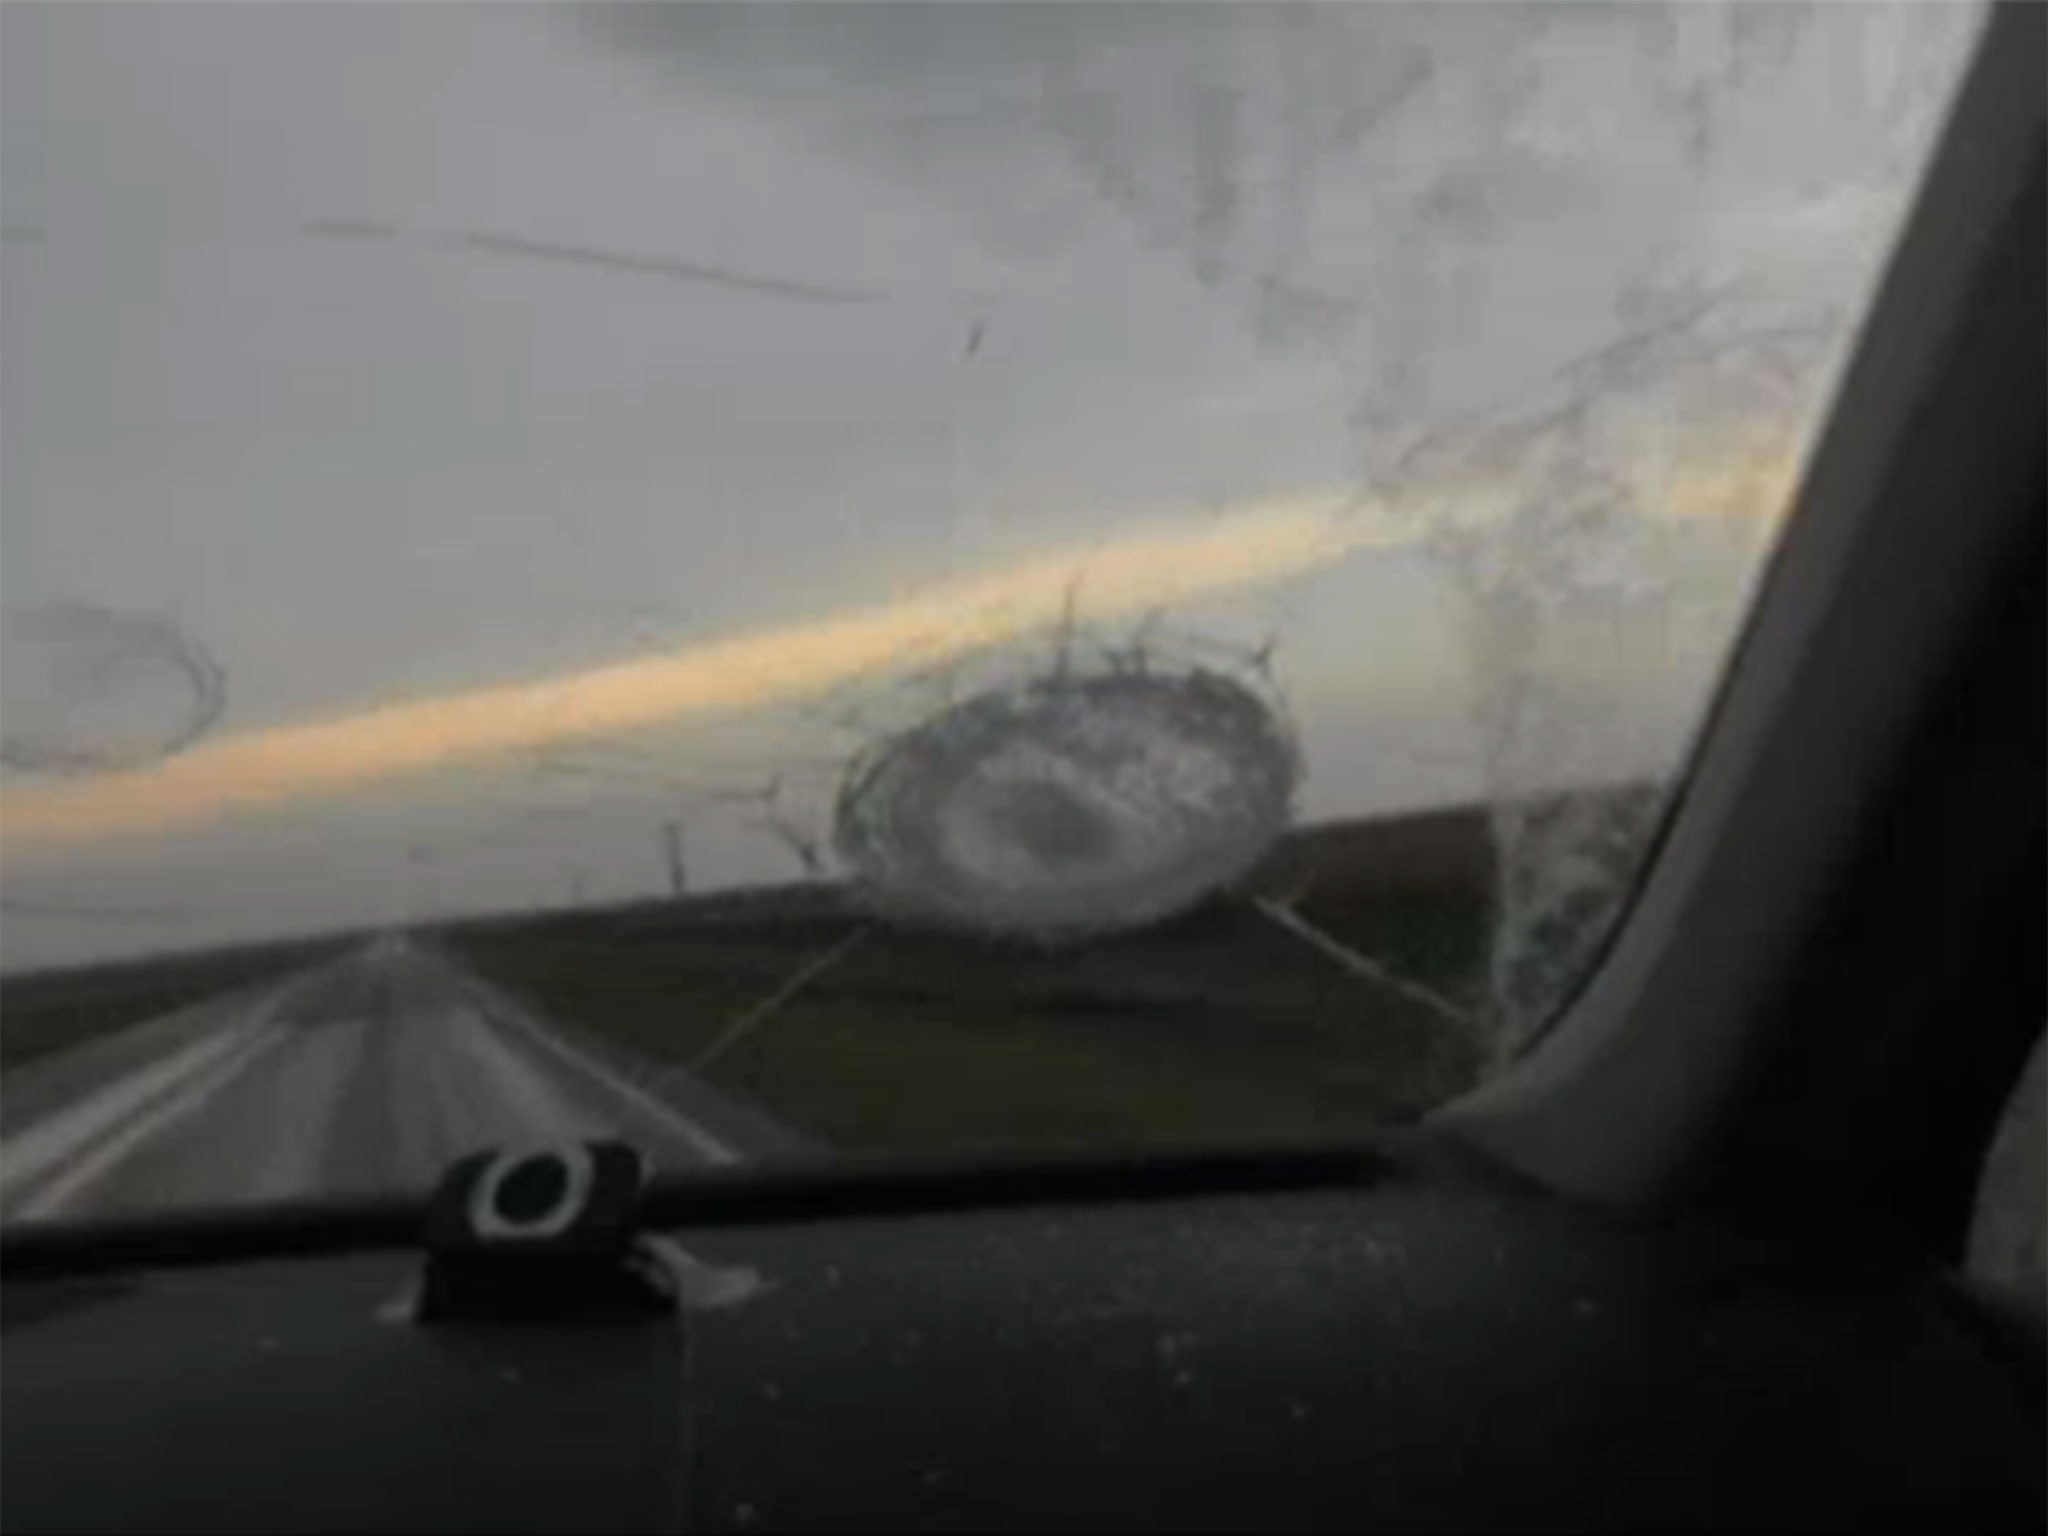 Car windscreen smashed by the massive hailstones